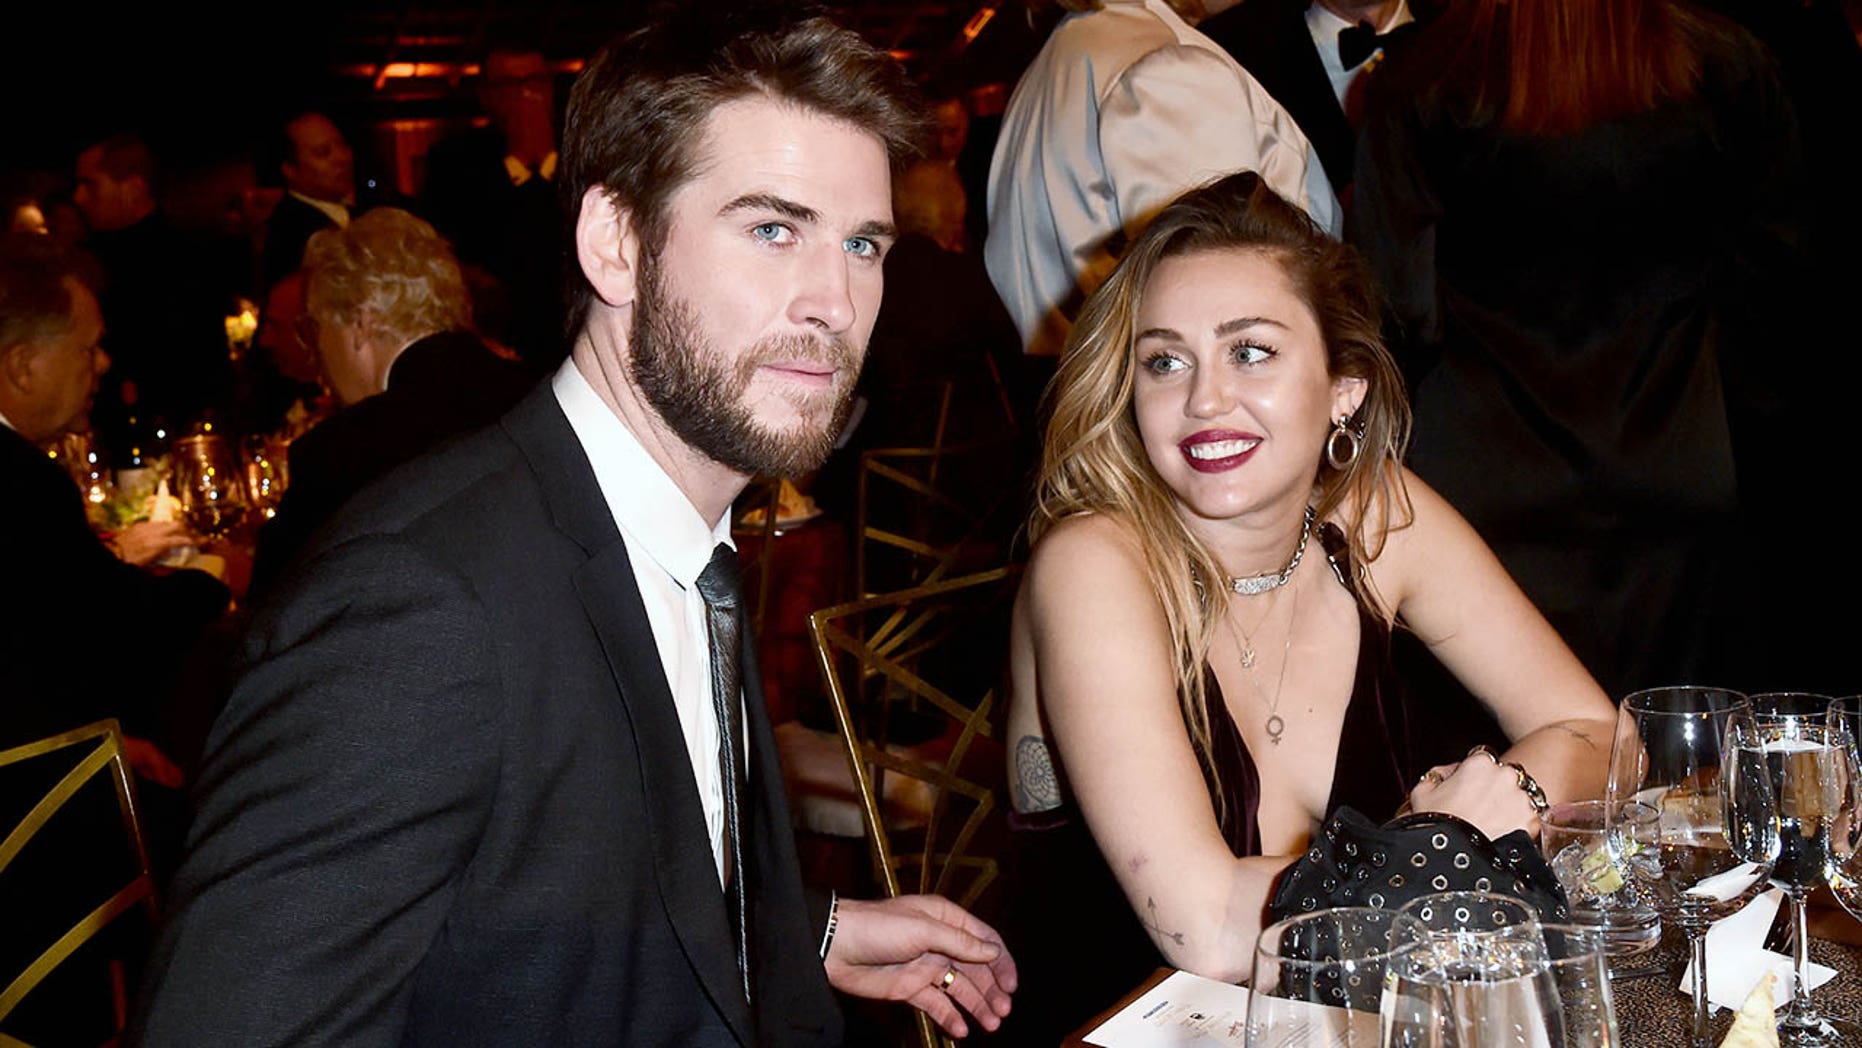 Miley Cyrus And Liam Hemsworth Make First Public Outing Since Secret